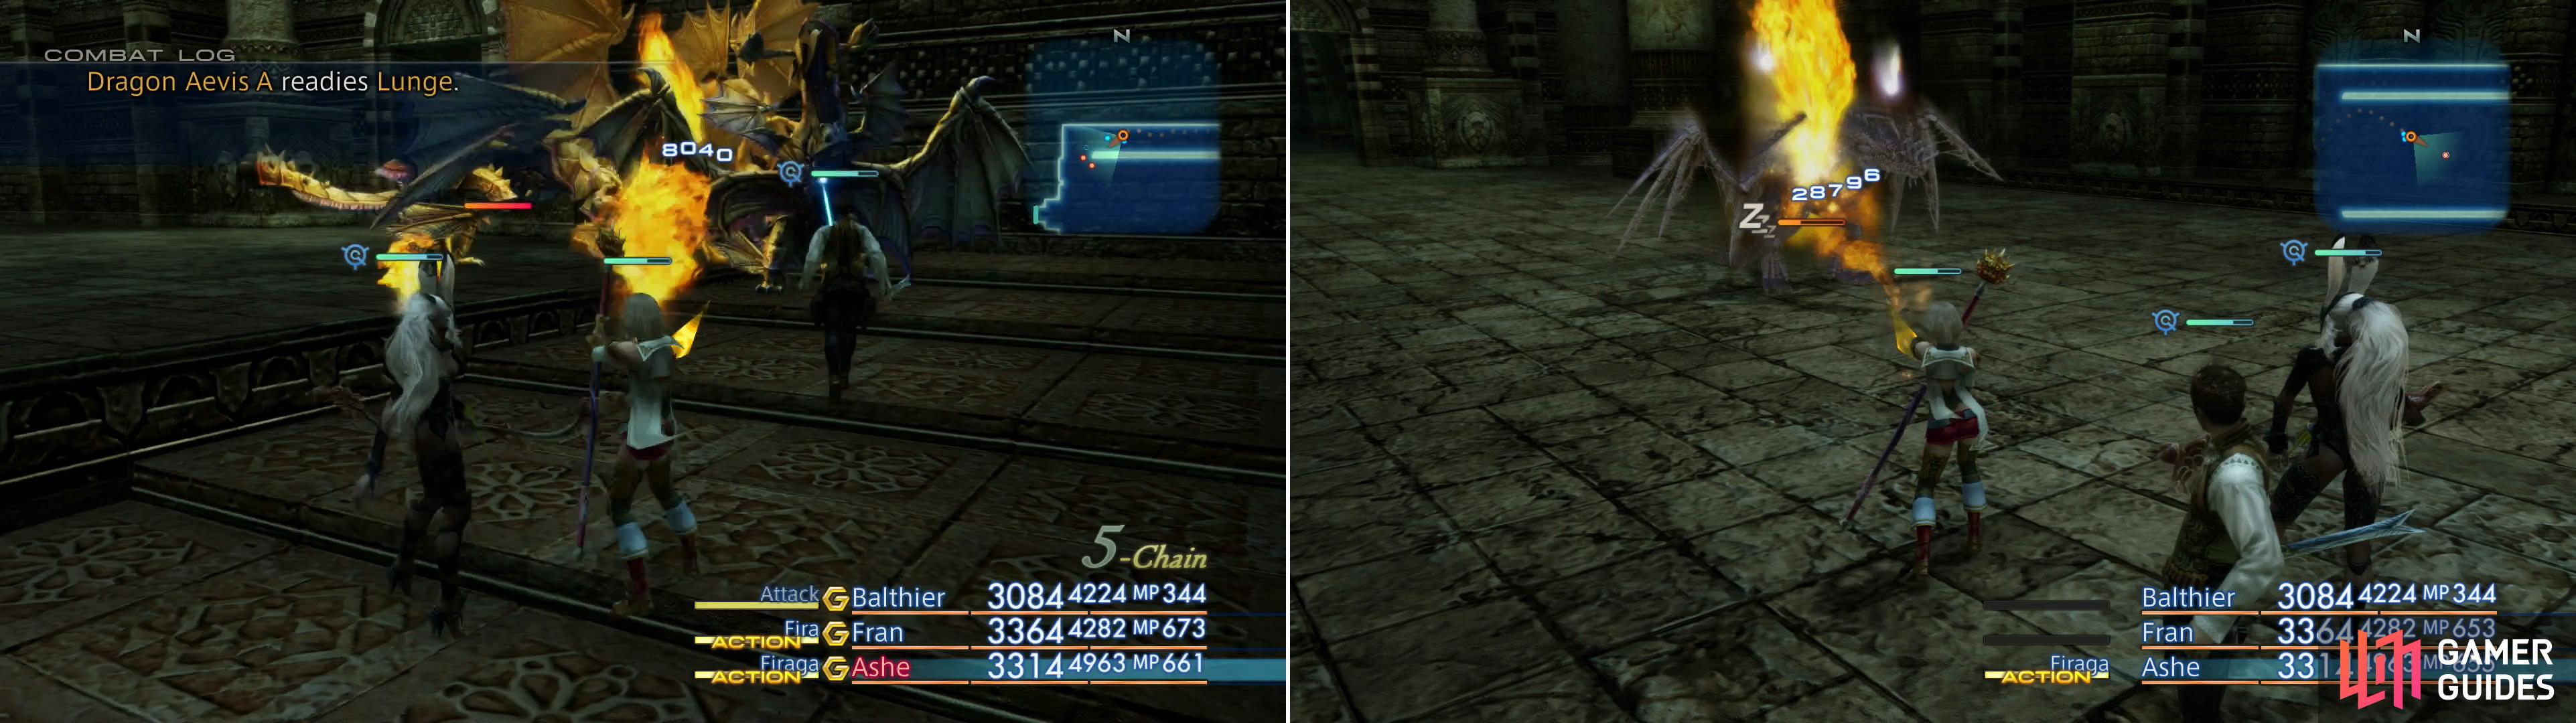 Kill the Dragon Aevis foes in the Ward of Velitation area (left) to draw out Myath, who can be defeated in much the same fashion (right).